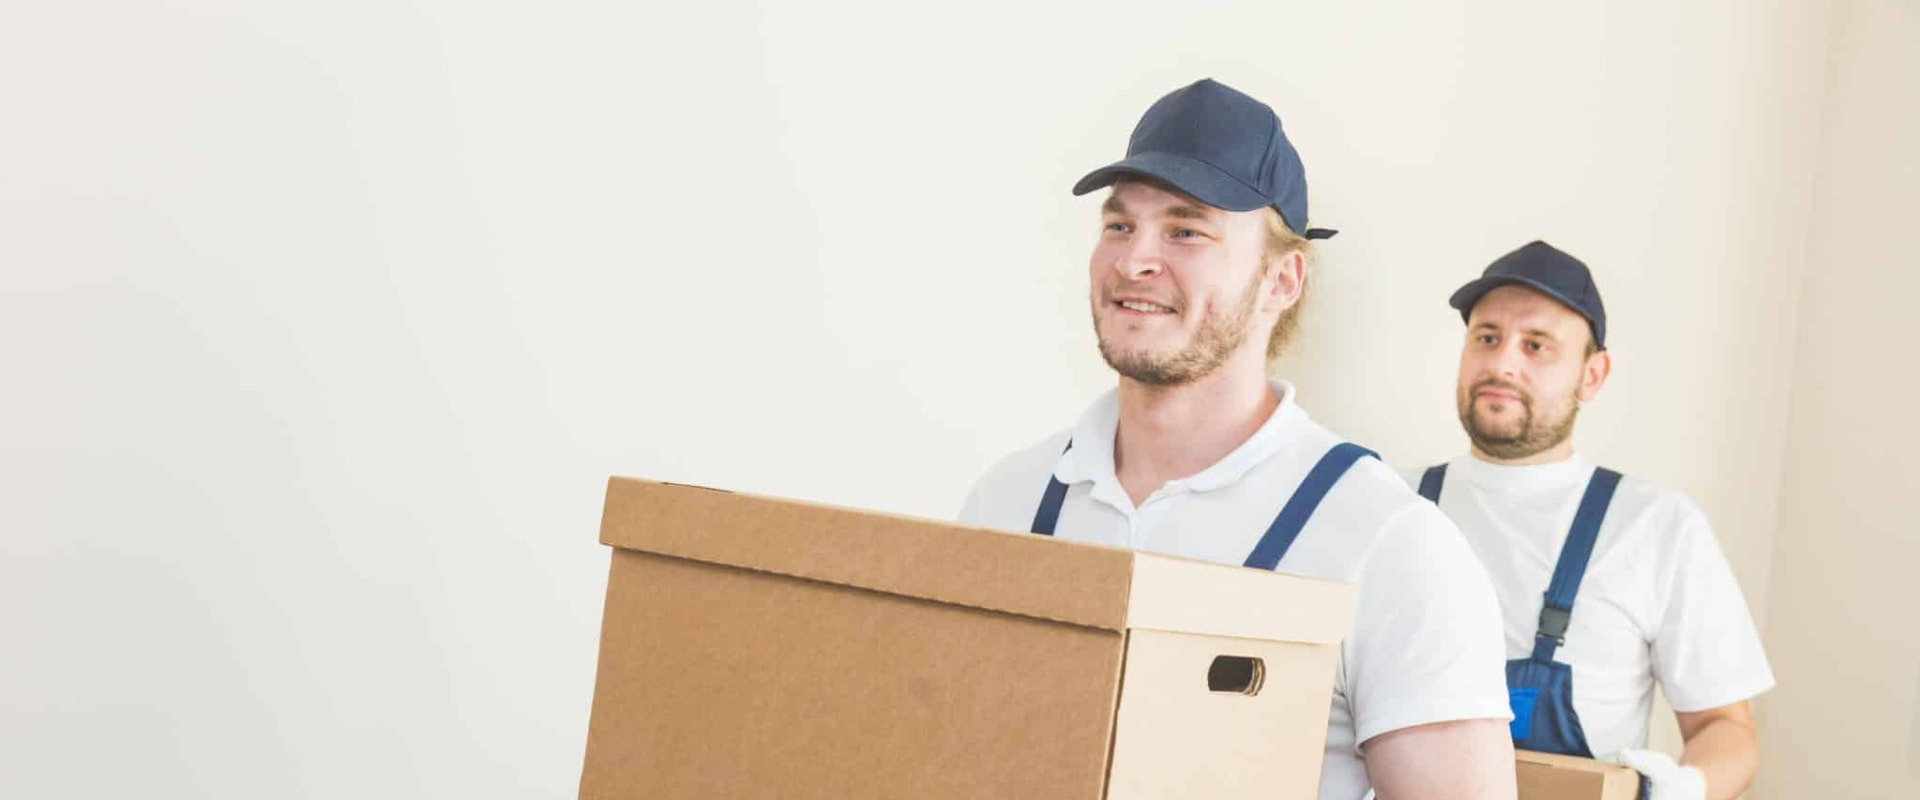 Moving Made Simple: The Benefits Of Working With An Arlington Moving Company For Your Truck Rental Needs